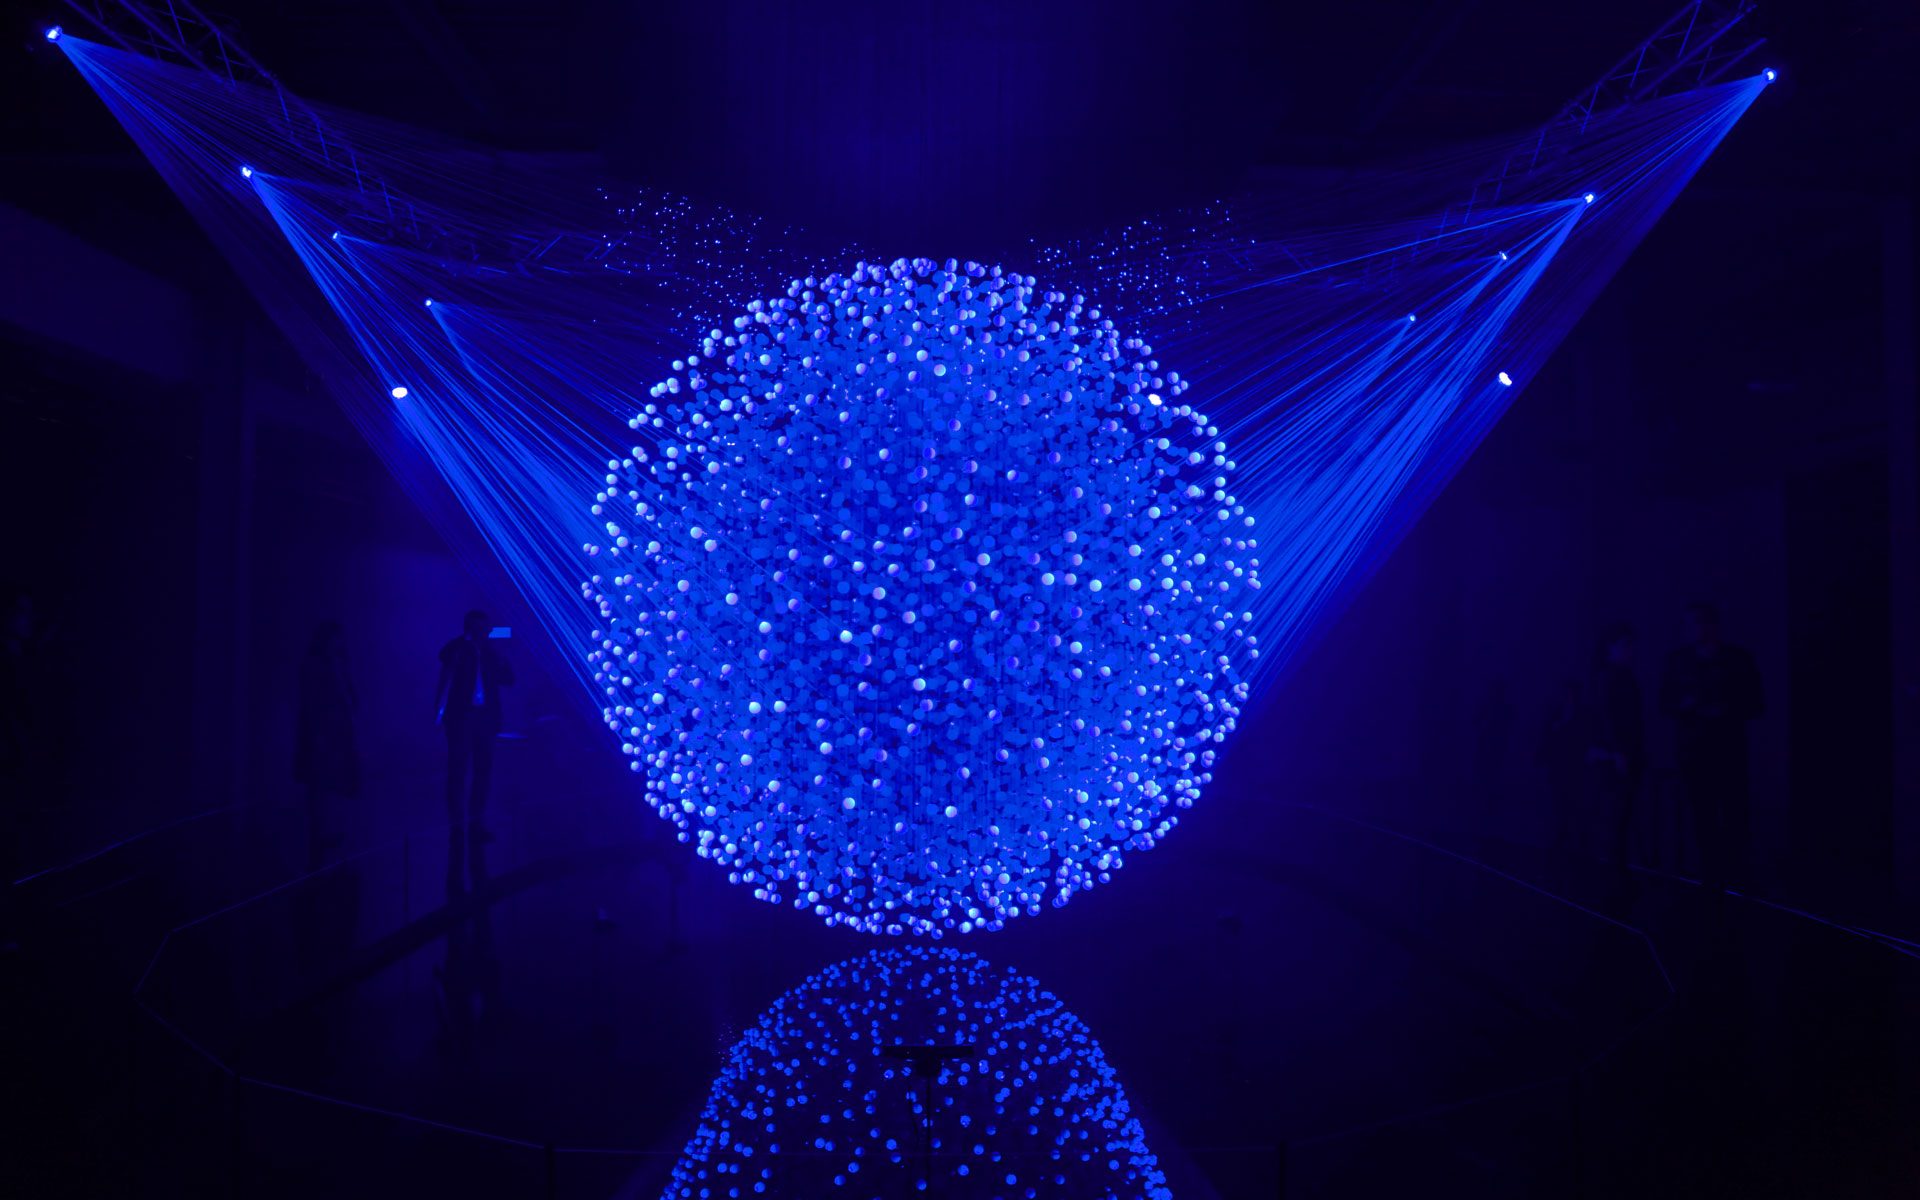 light installation art exhibition and design news and projects